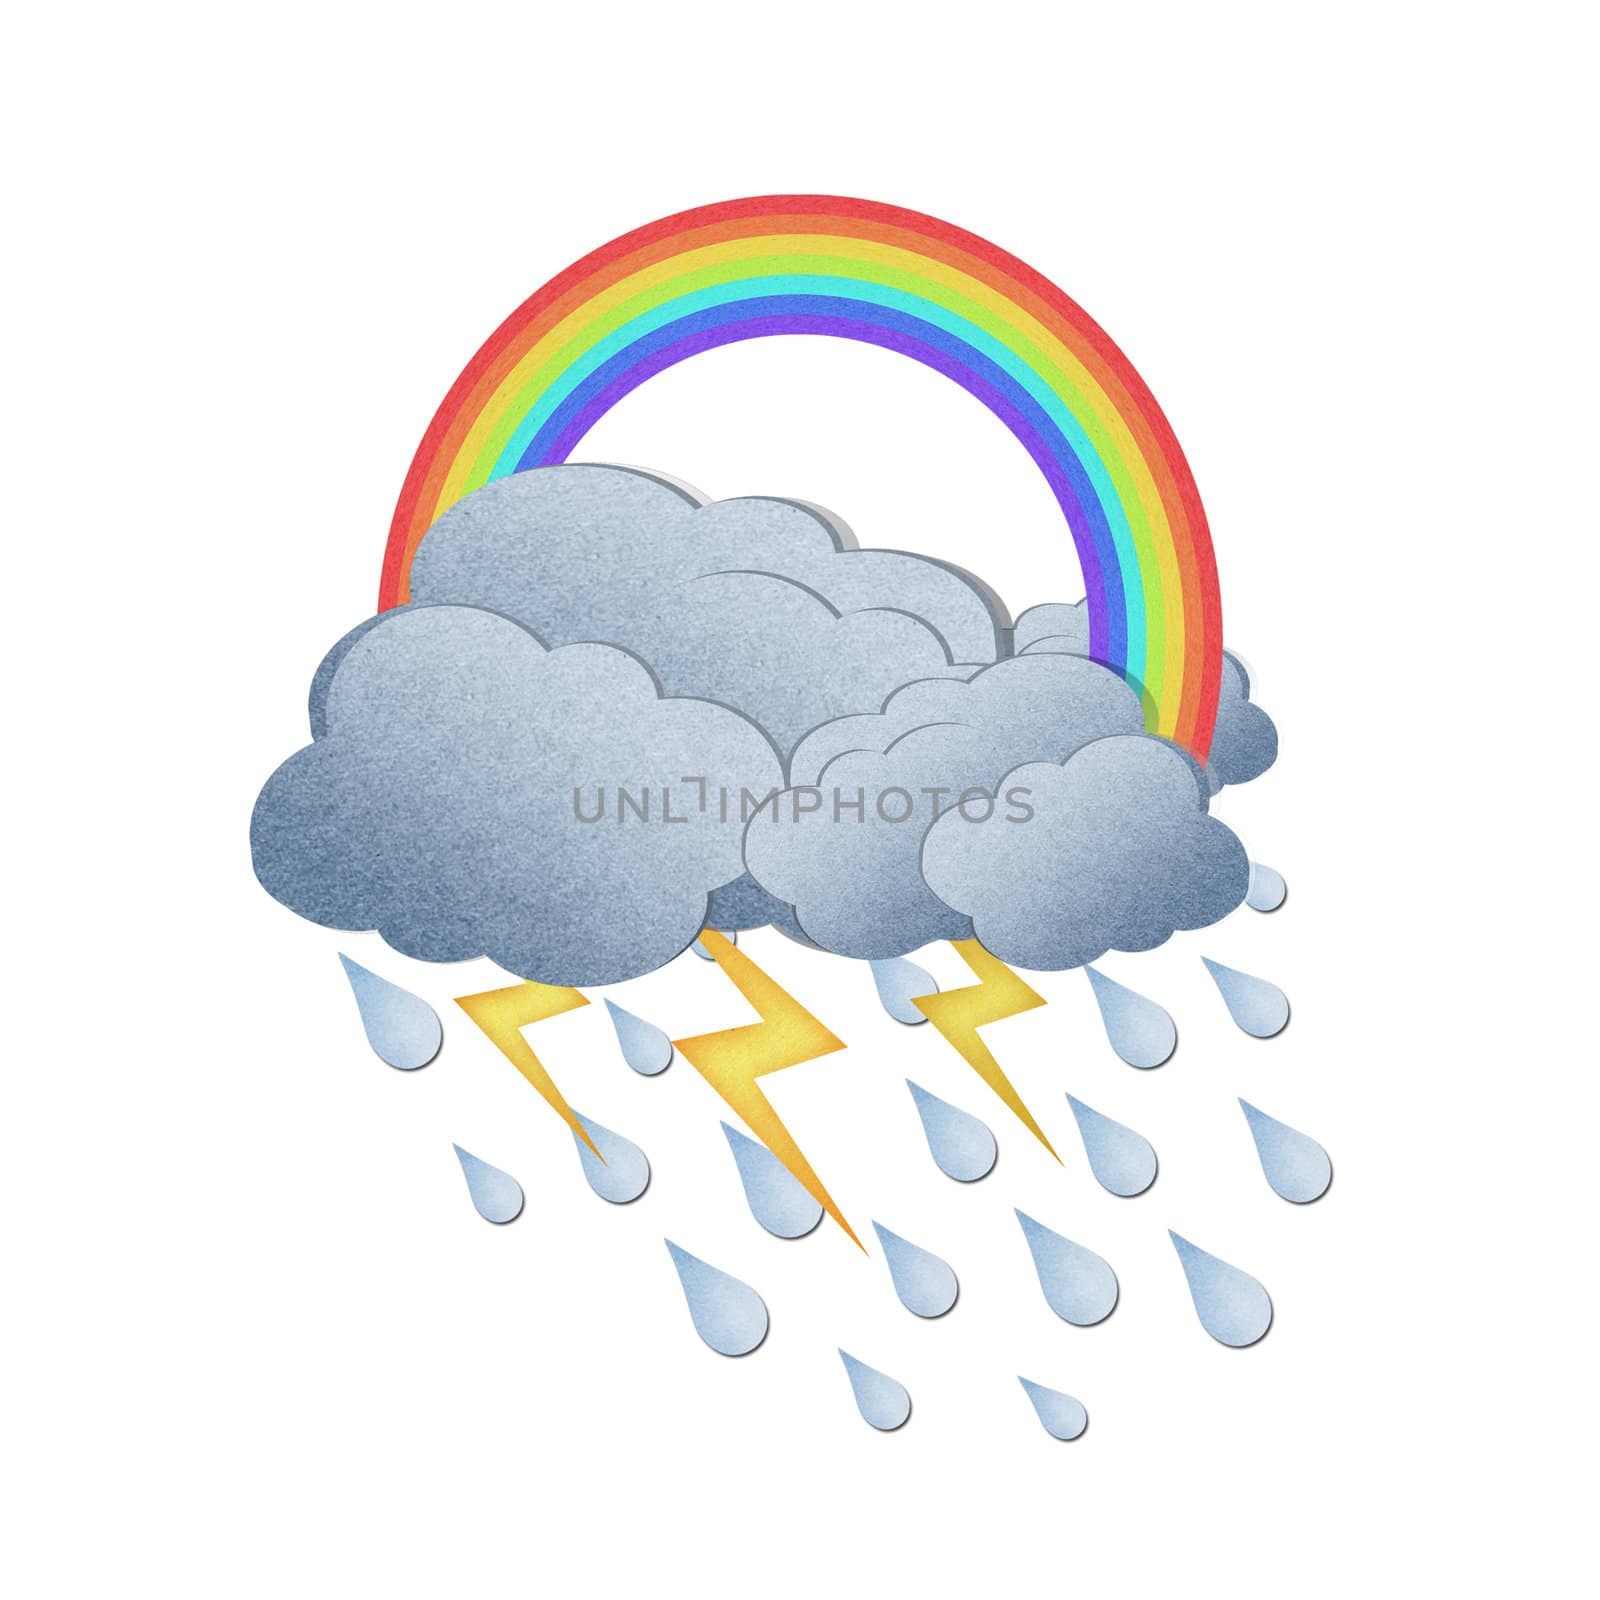  Grunge recycled paper rainbow with rain on white background by jakgree